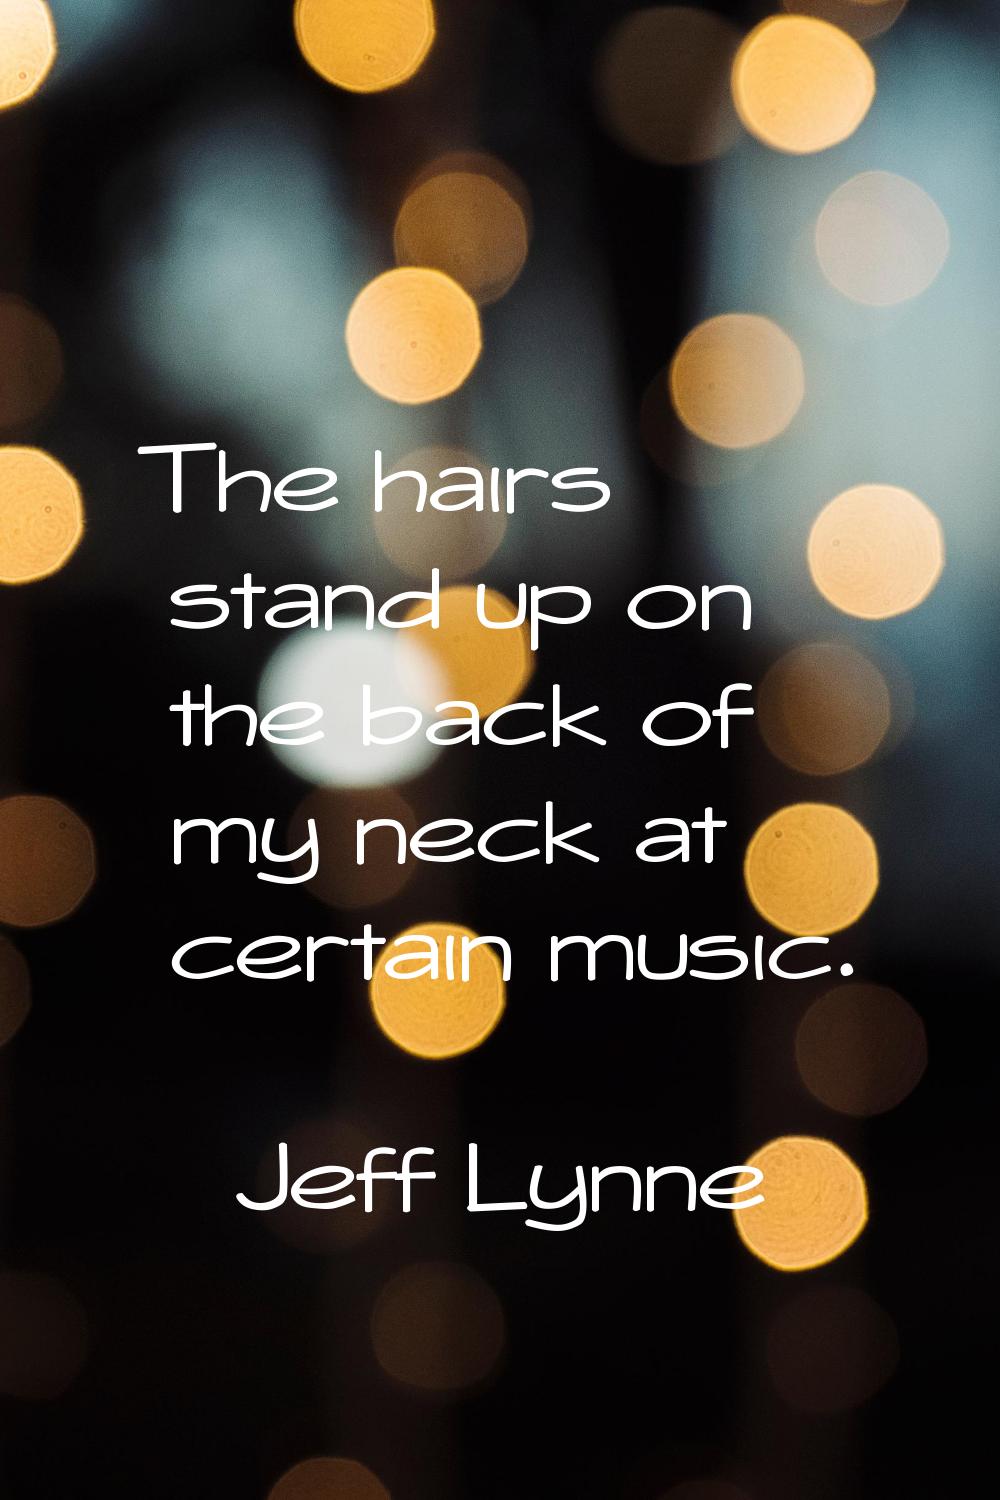 The hairs stand up on the back of my neck at certain music.